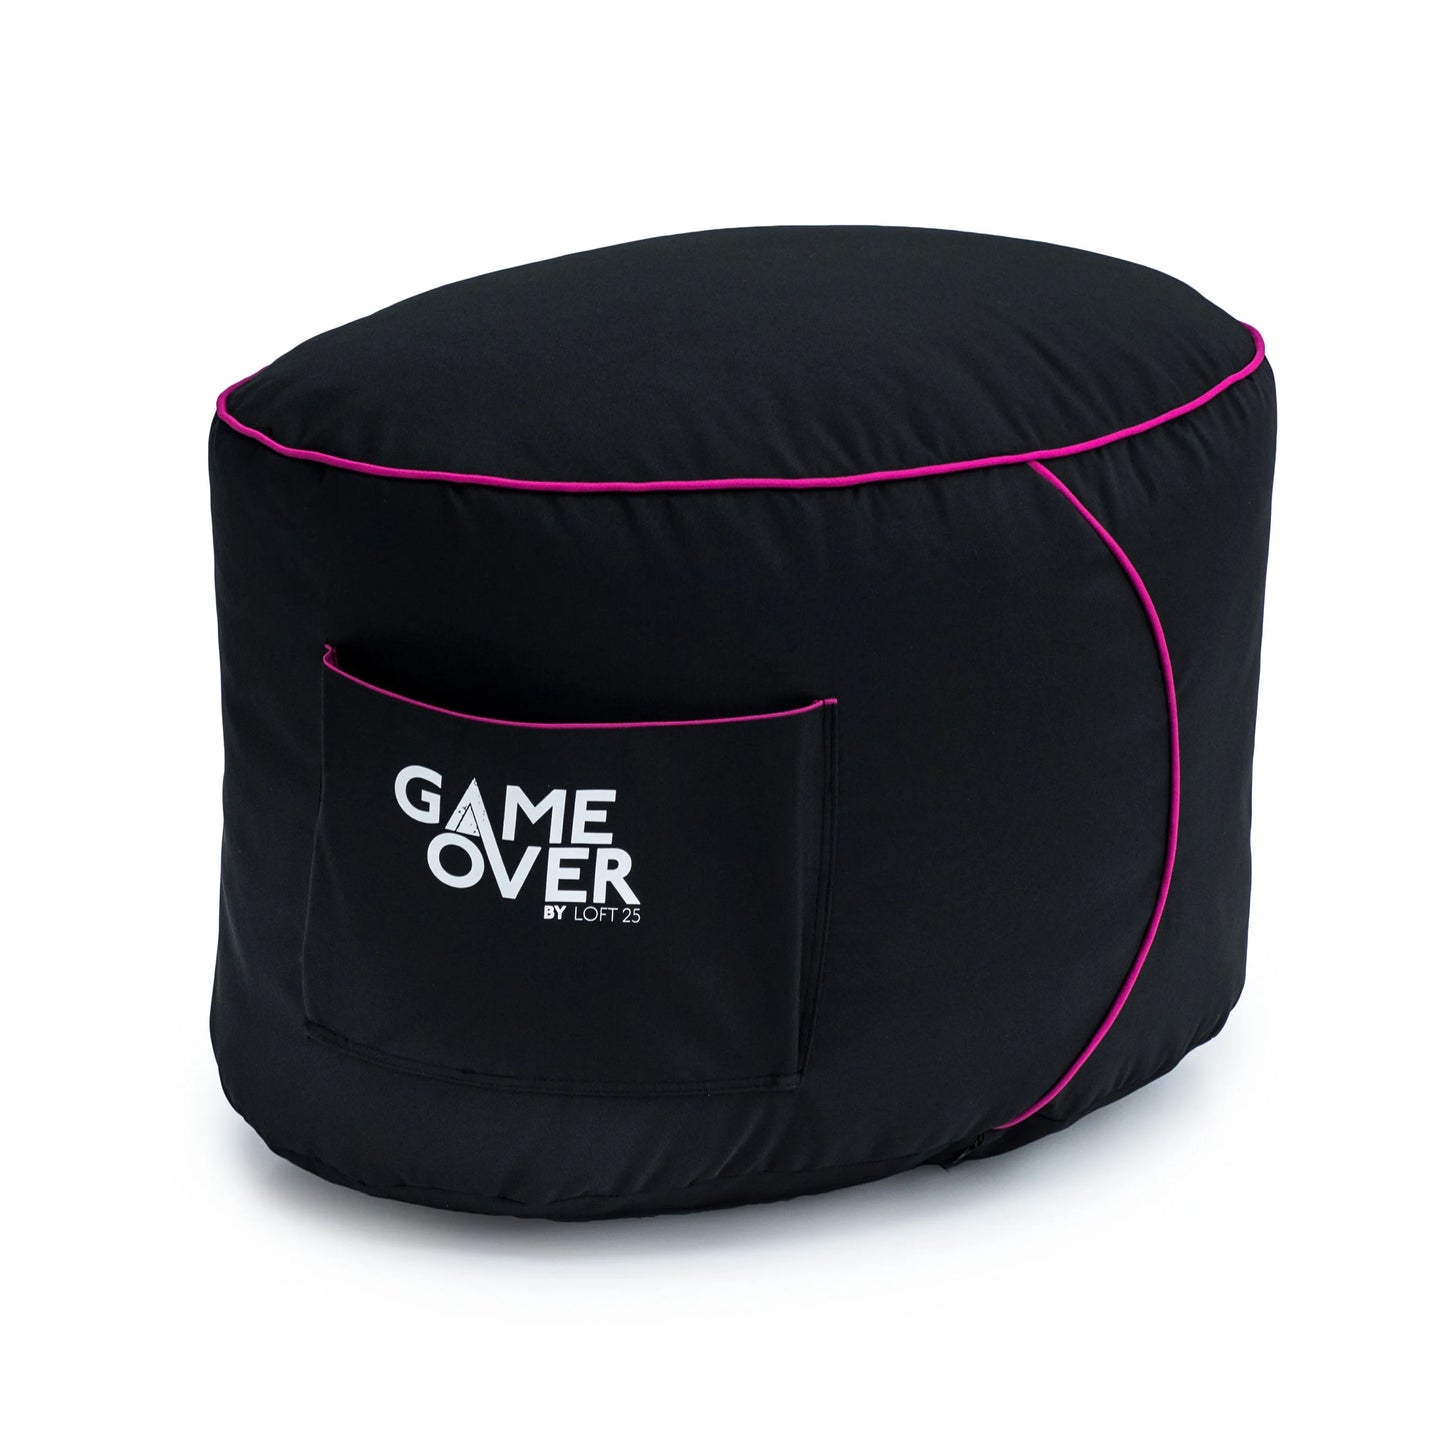 Comfortable and stylish bean bag ottoman cover for gamers